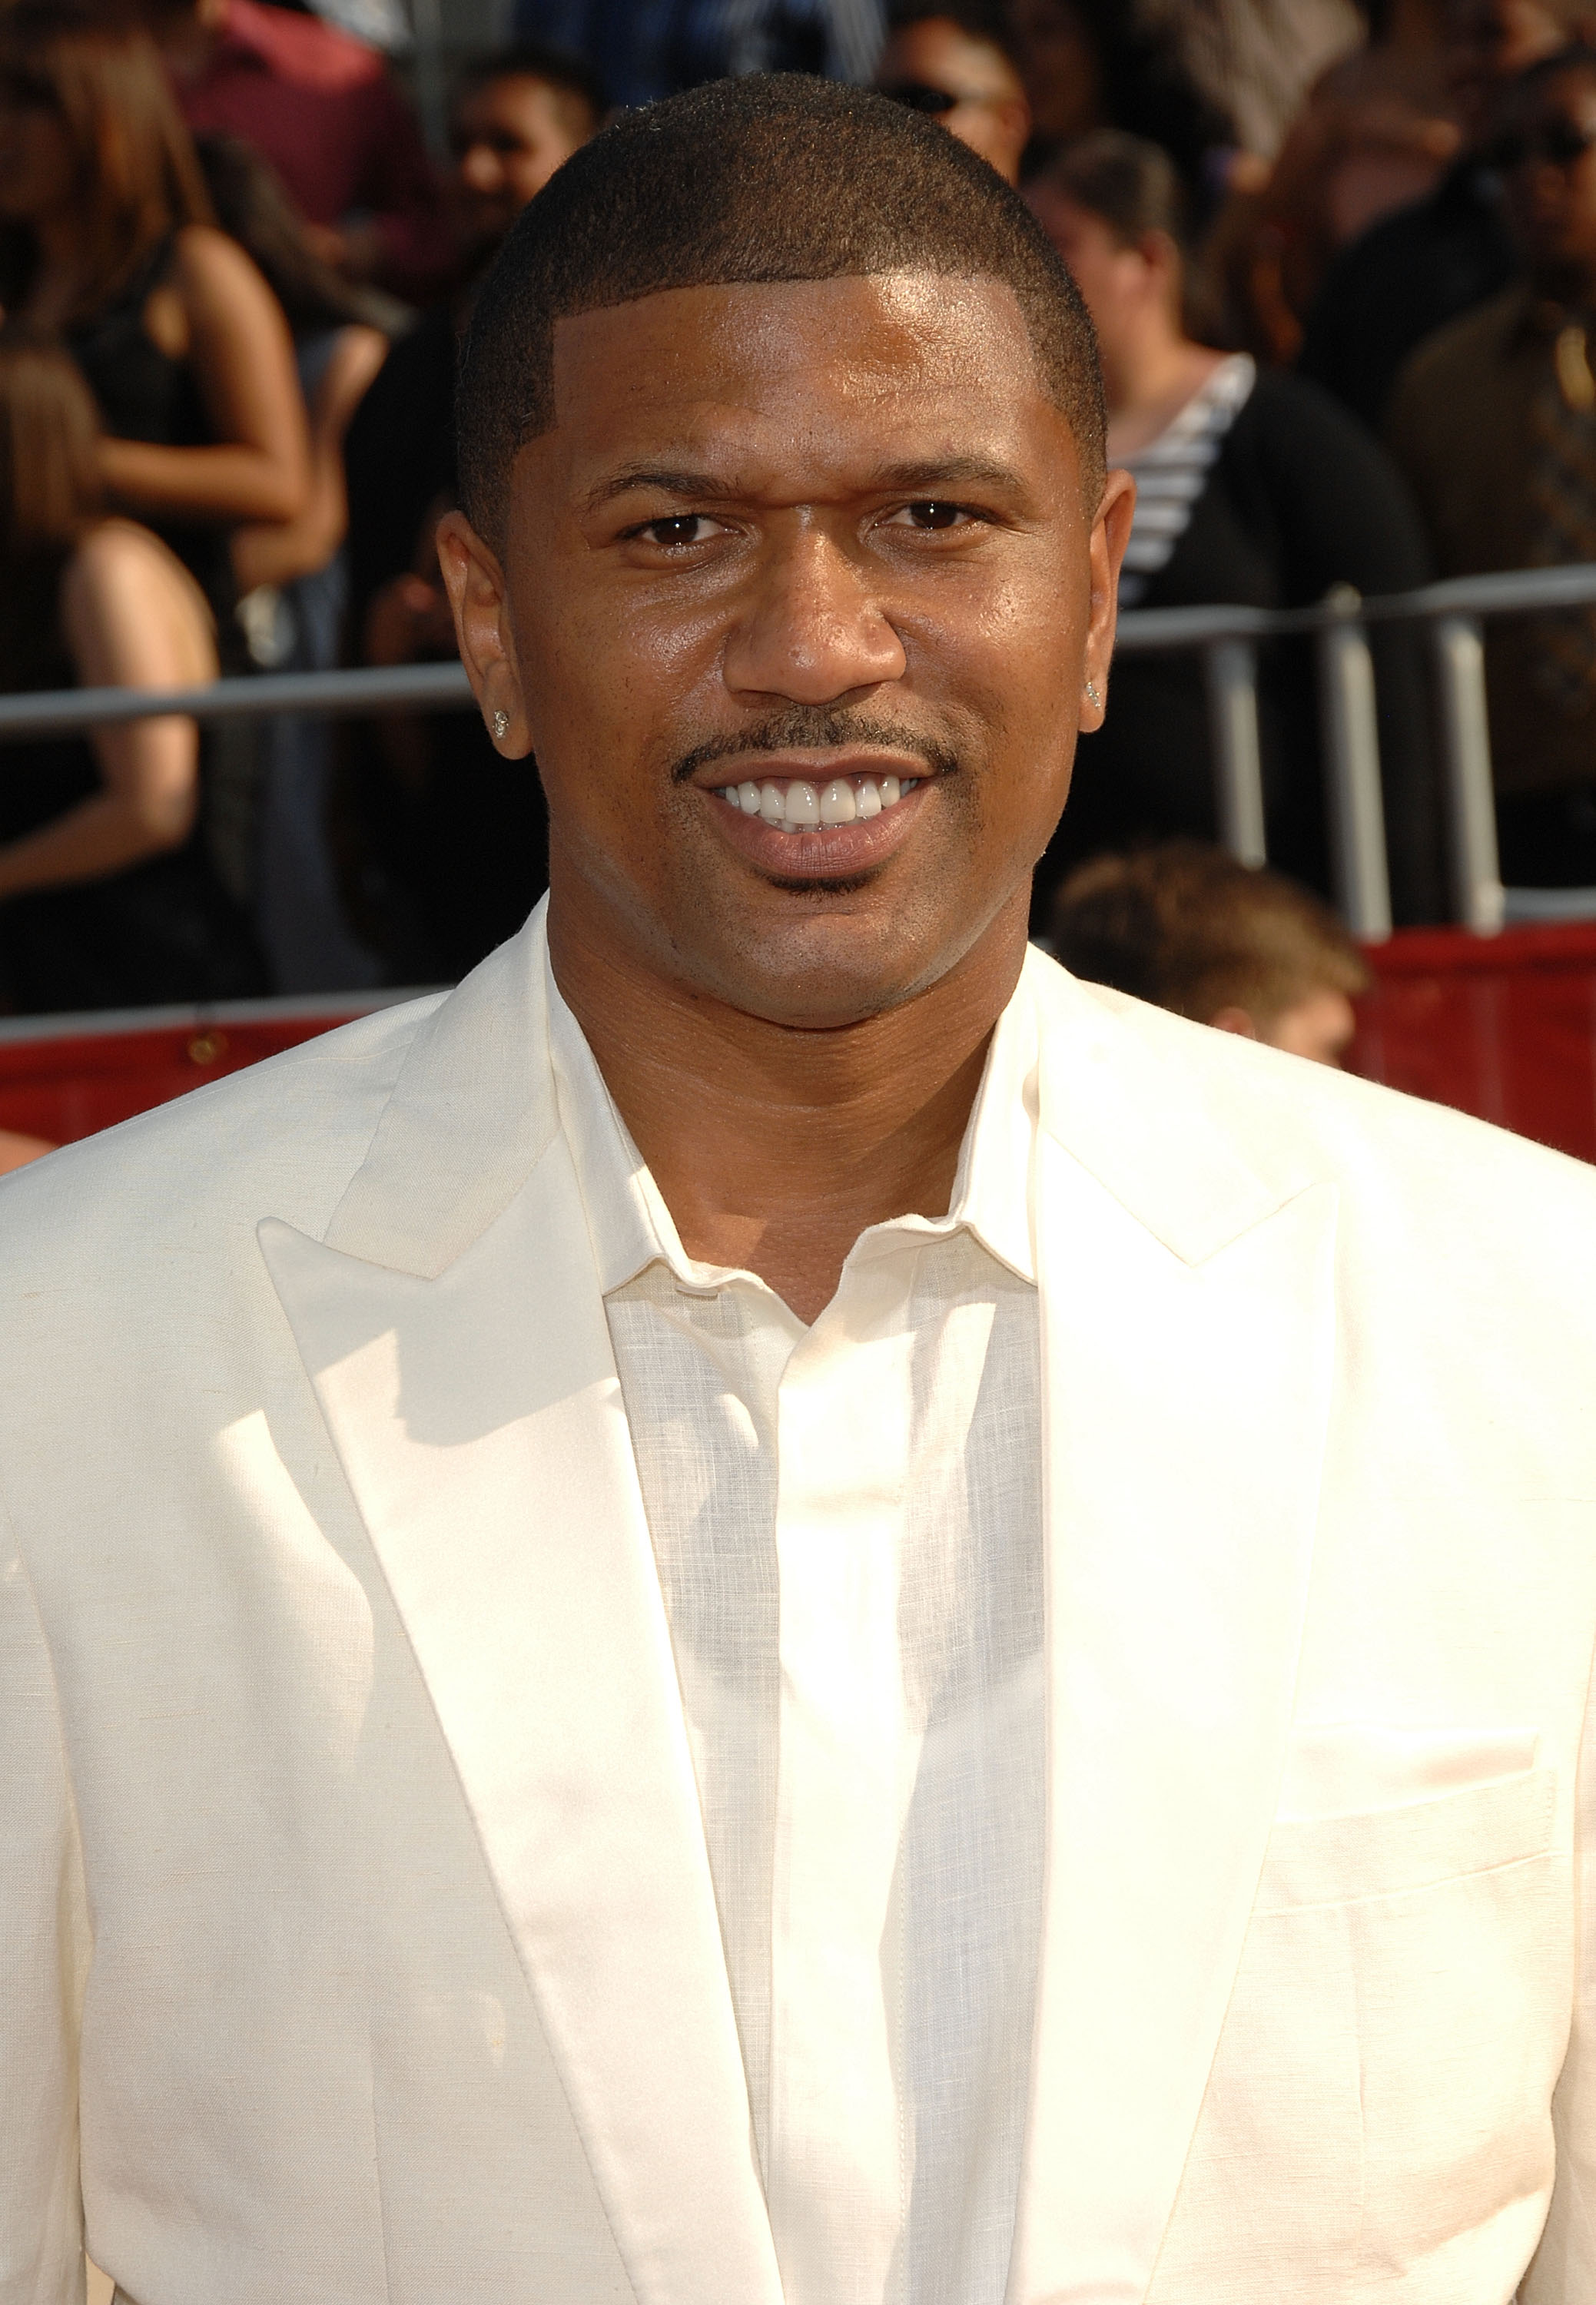 LOS ANGELES, CA - JULY 16:  Reitred NBA athlete Jalen Rose arrives at the 2008 ESPY Awards held at NOKIA Theatre L.A. LIVE on July 16, 2008 in Los Angeles, California.  The 2008 ESPYs will air on Sunday, July 20 at 9PM ET on ESPN.  (Photo by Stephen Shuge